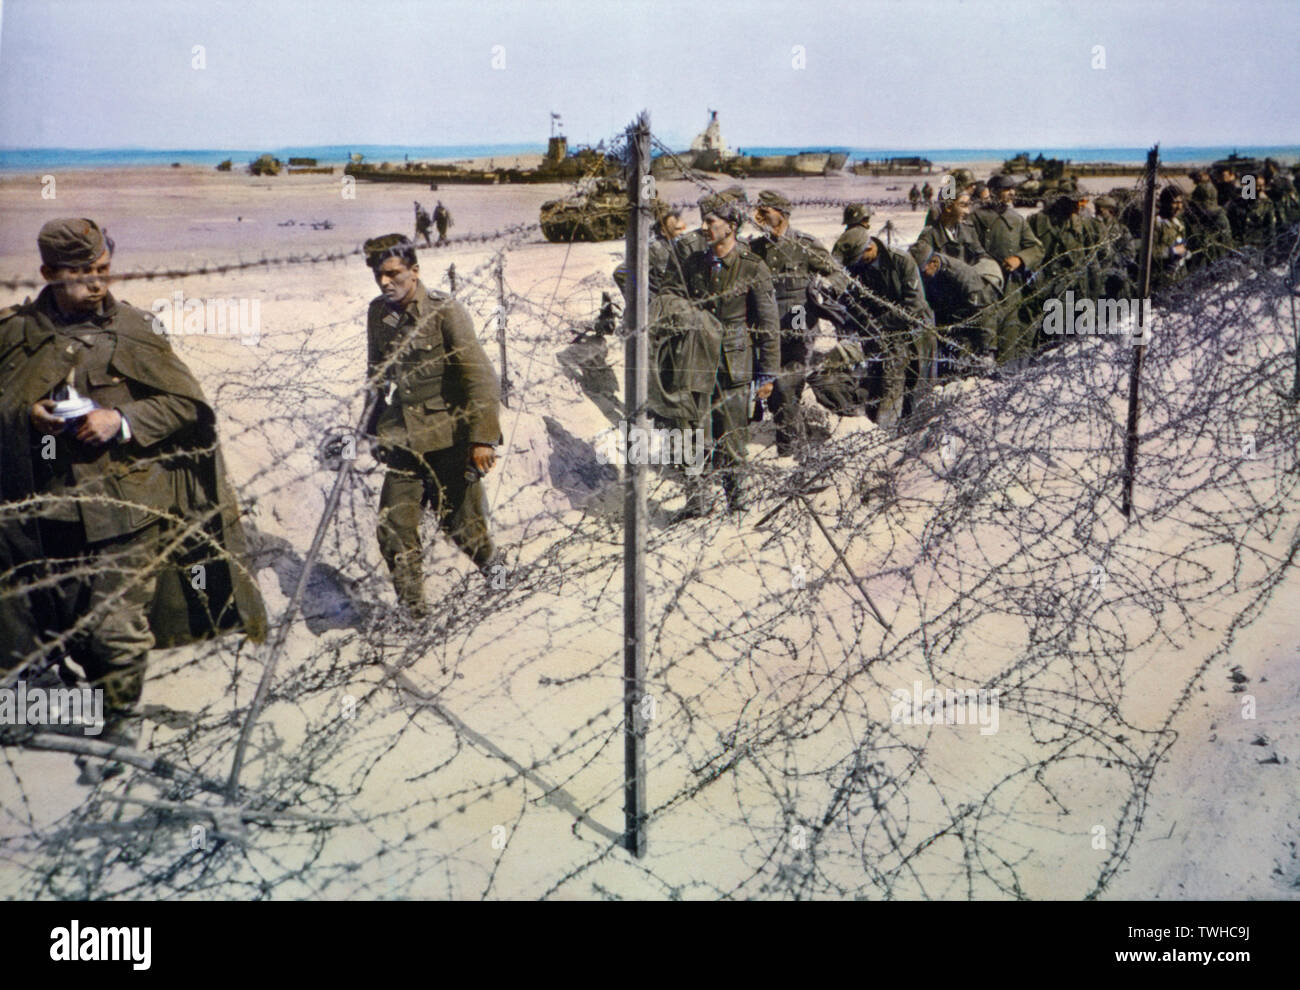 Captured German Soldiers Kept in Barbed Wire Enclosure on Beach during Invasion of Normandy, France, June 1944 Stock Photo